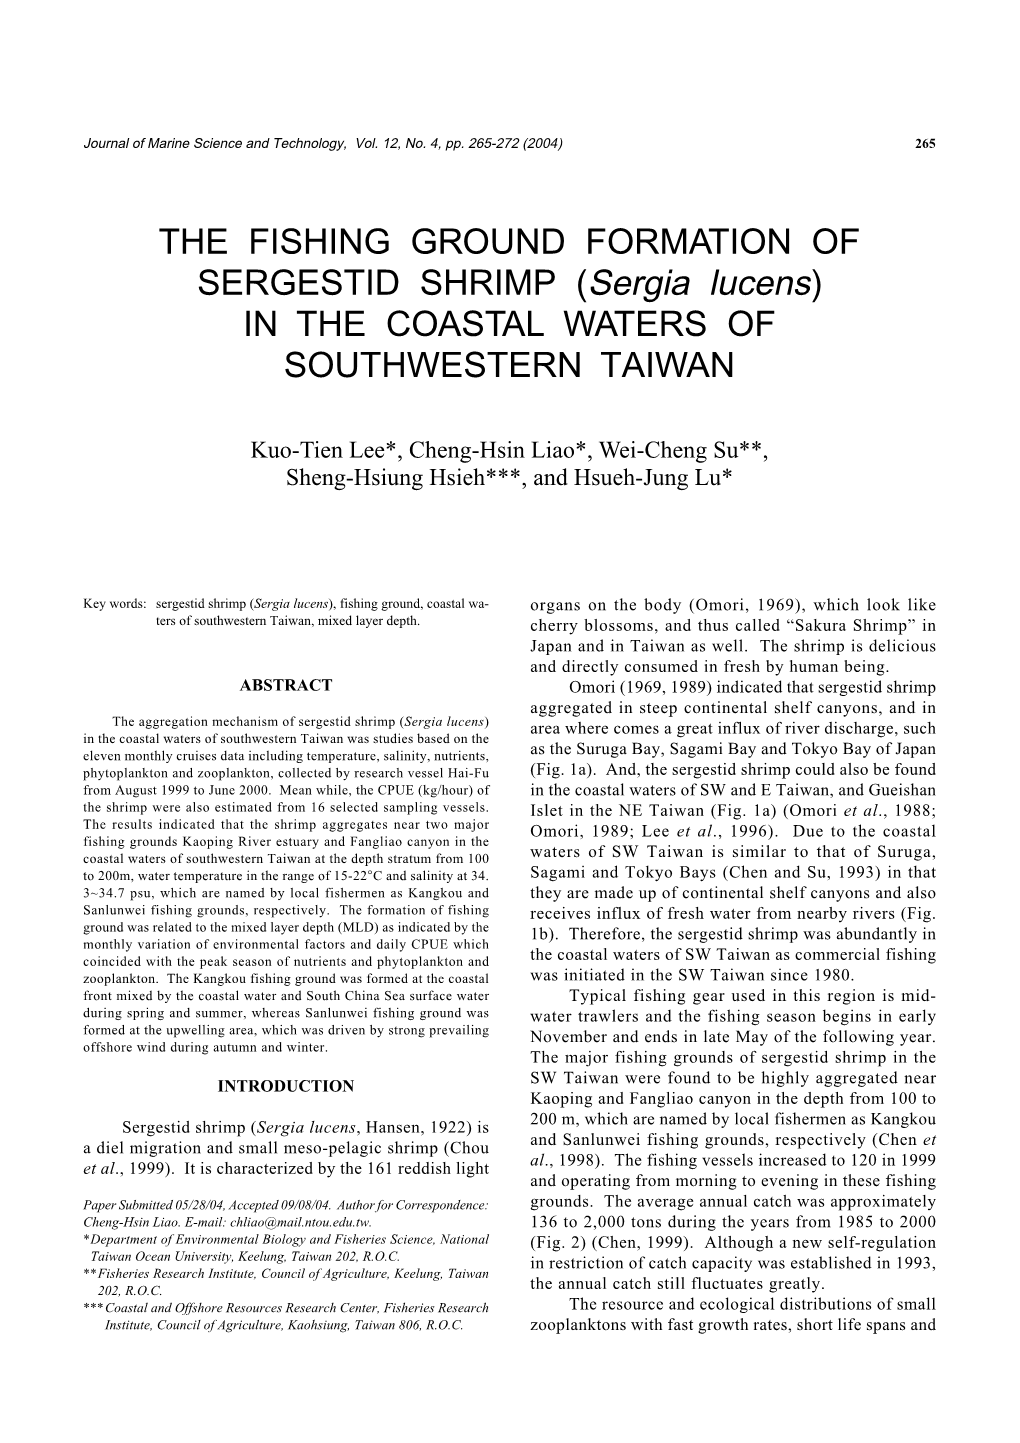 THE FISHING GROUND FORMATION of SERGESTID SHRIMP (Sergia Lucens) in the COASTAL WATERS of SOUTHWESTERN TAIWAN